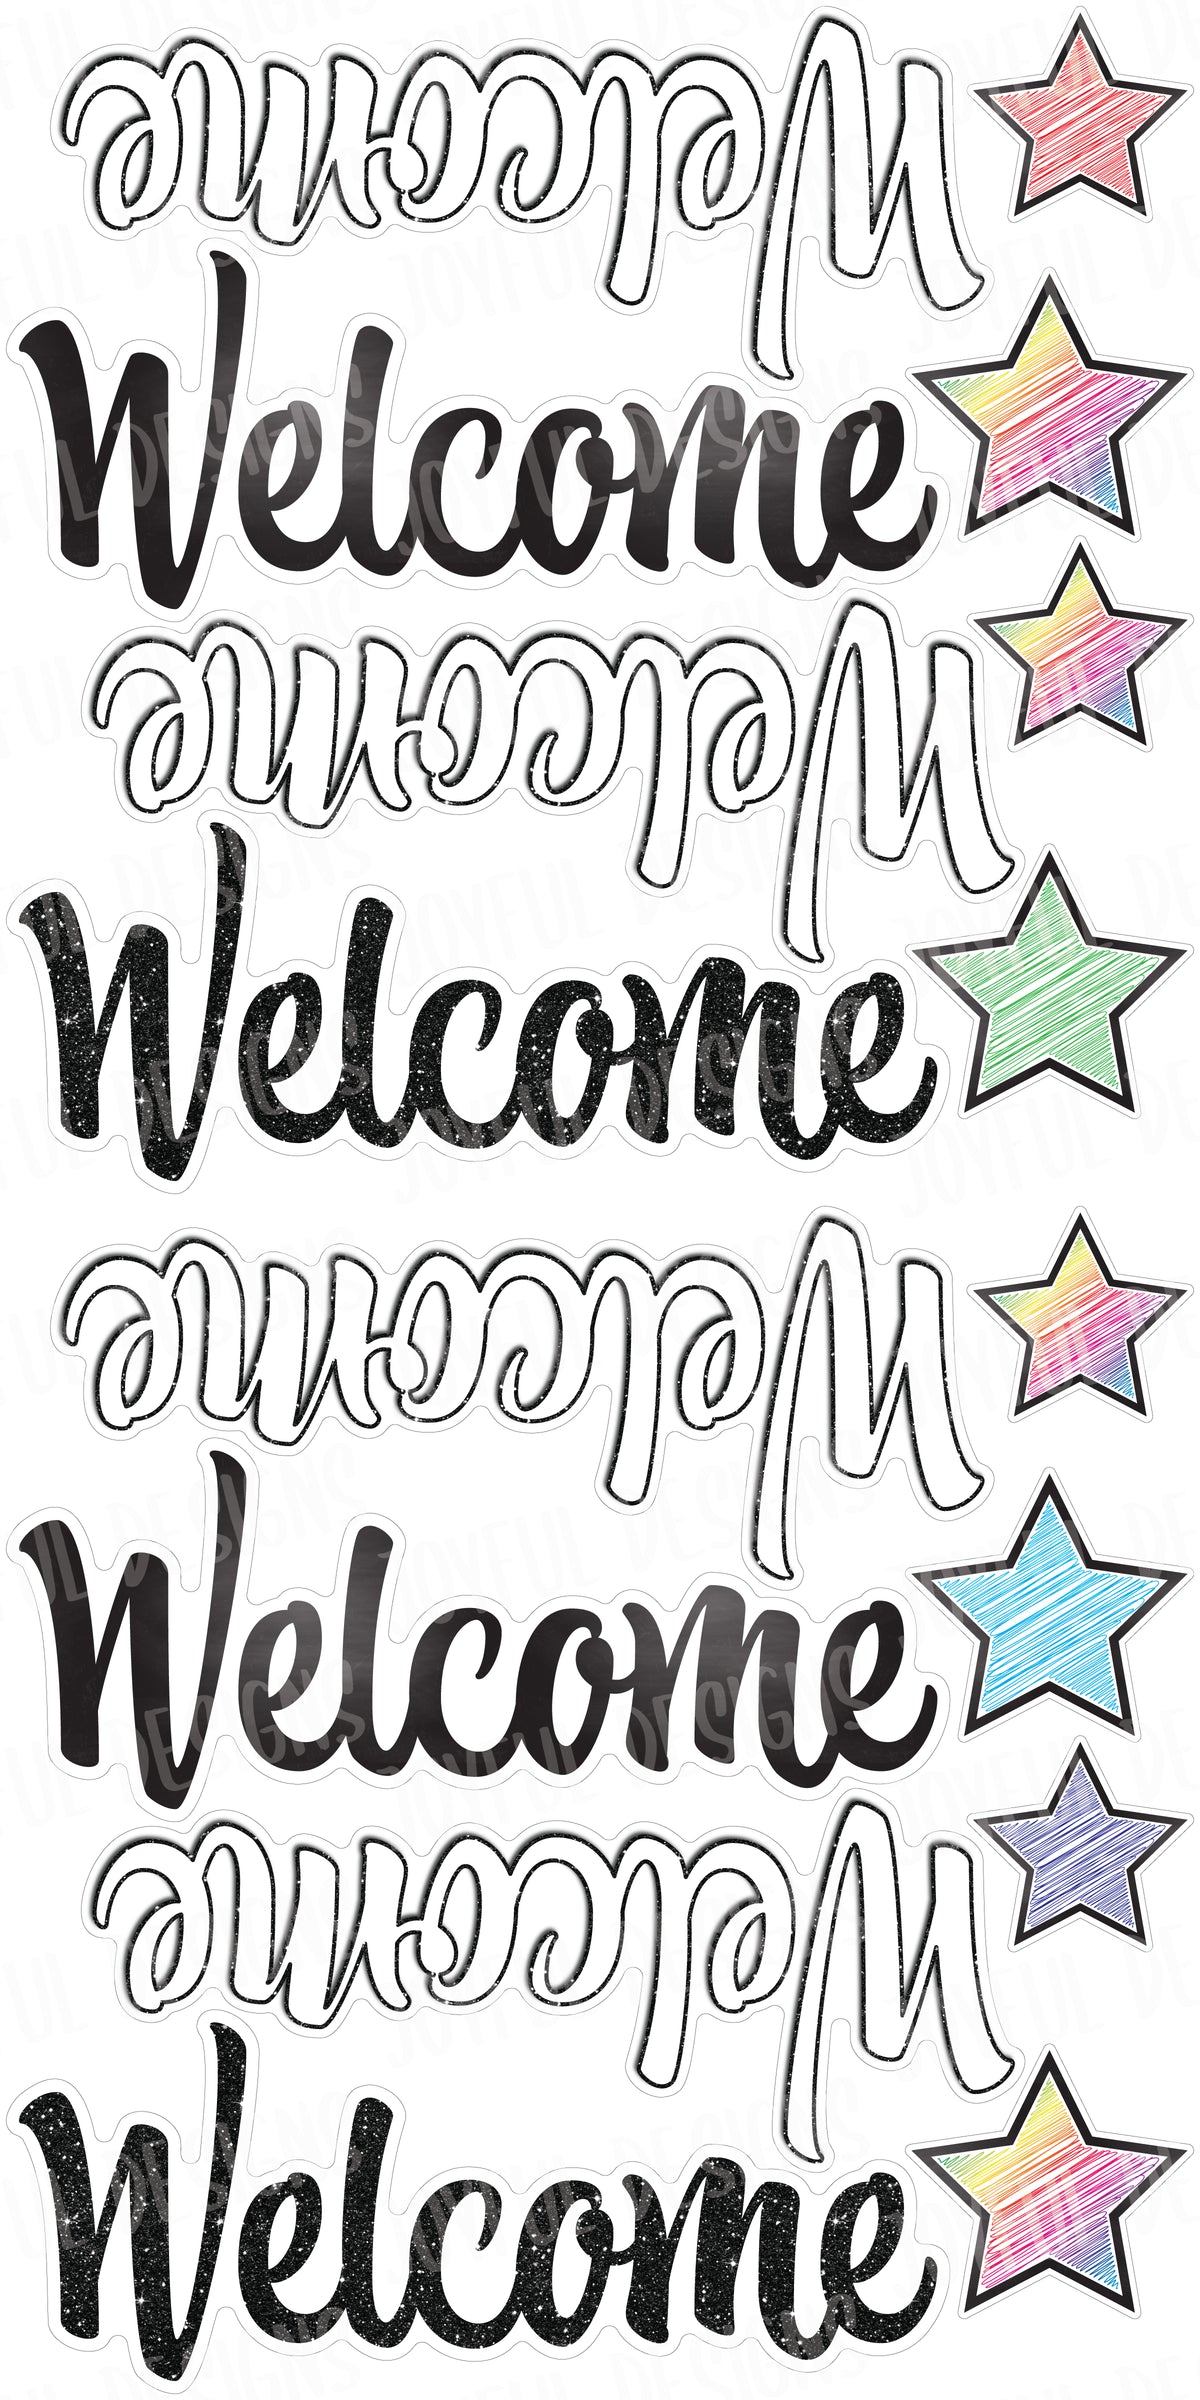 8 Welcome toppers - 4 black & 4 white - Script font